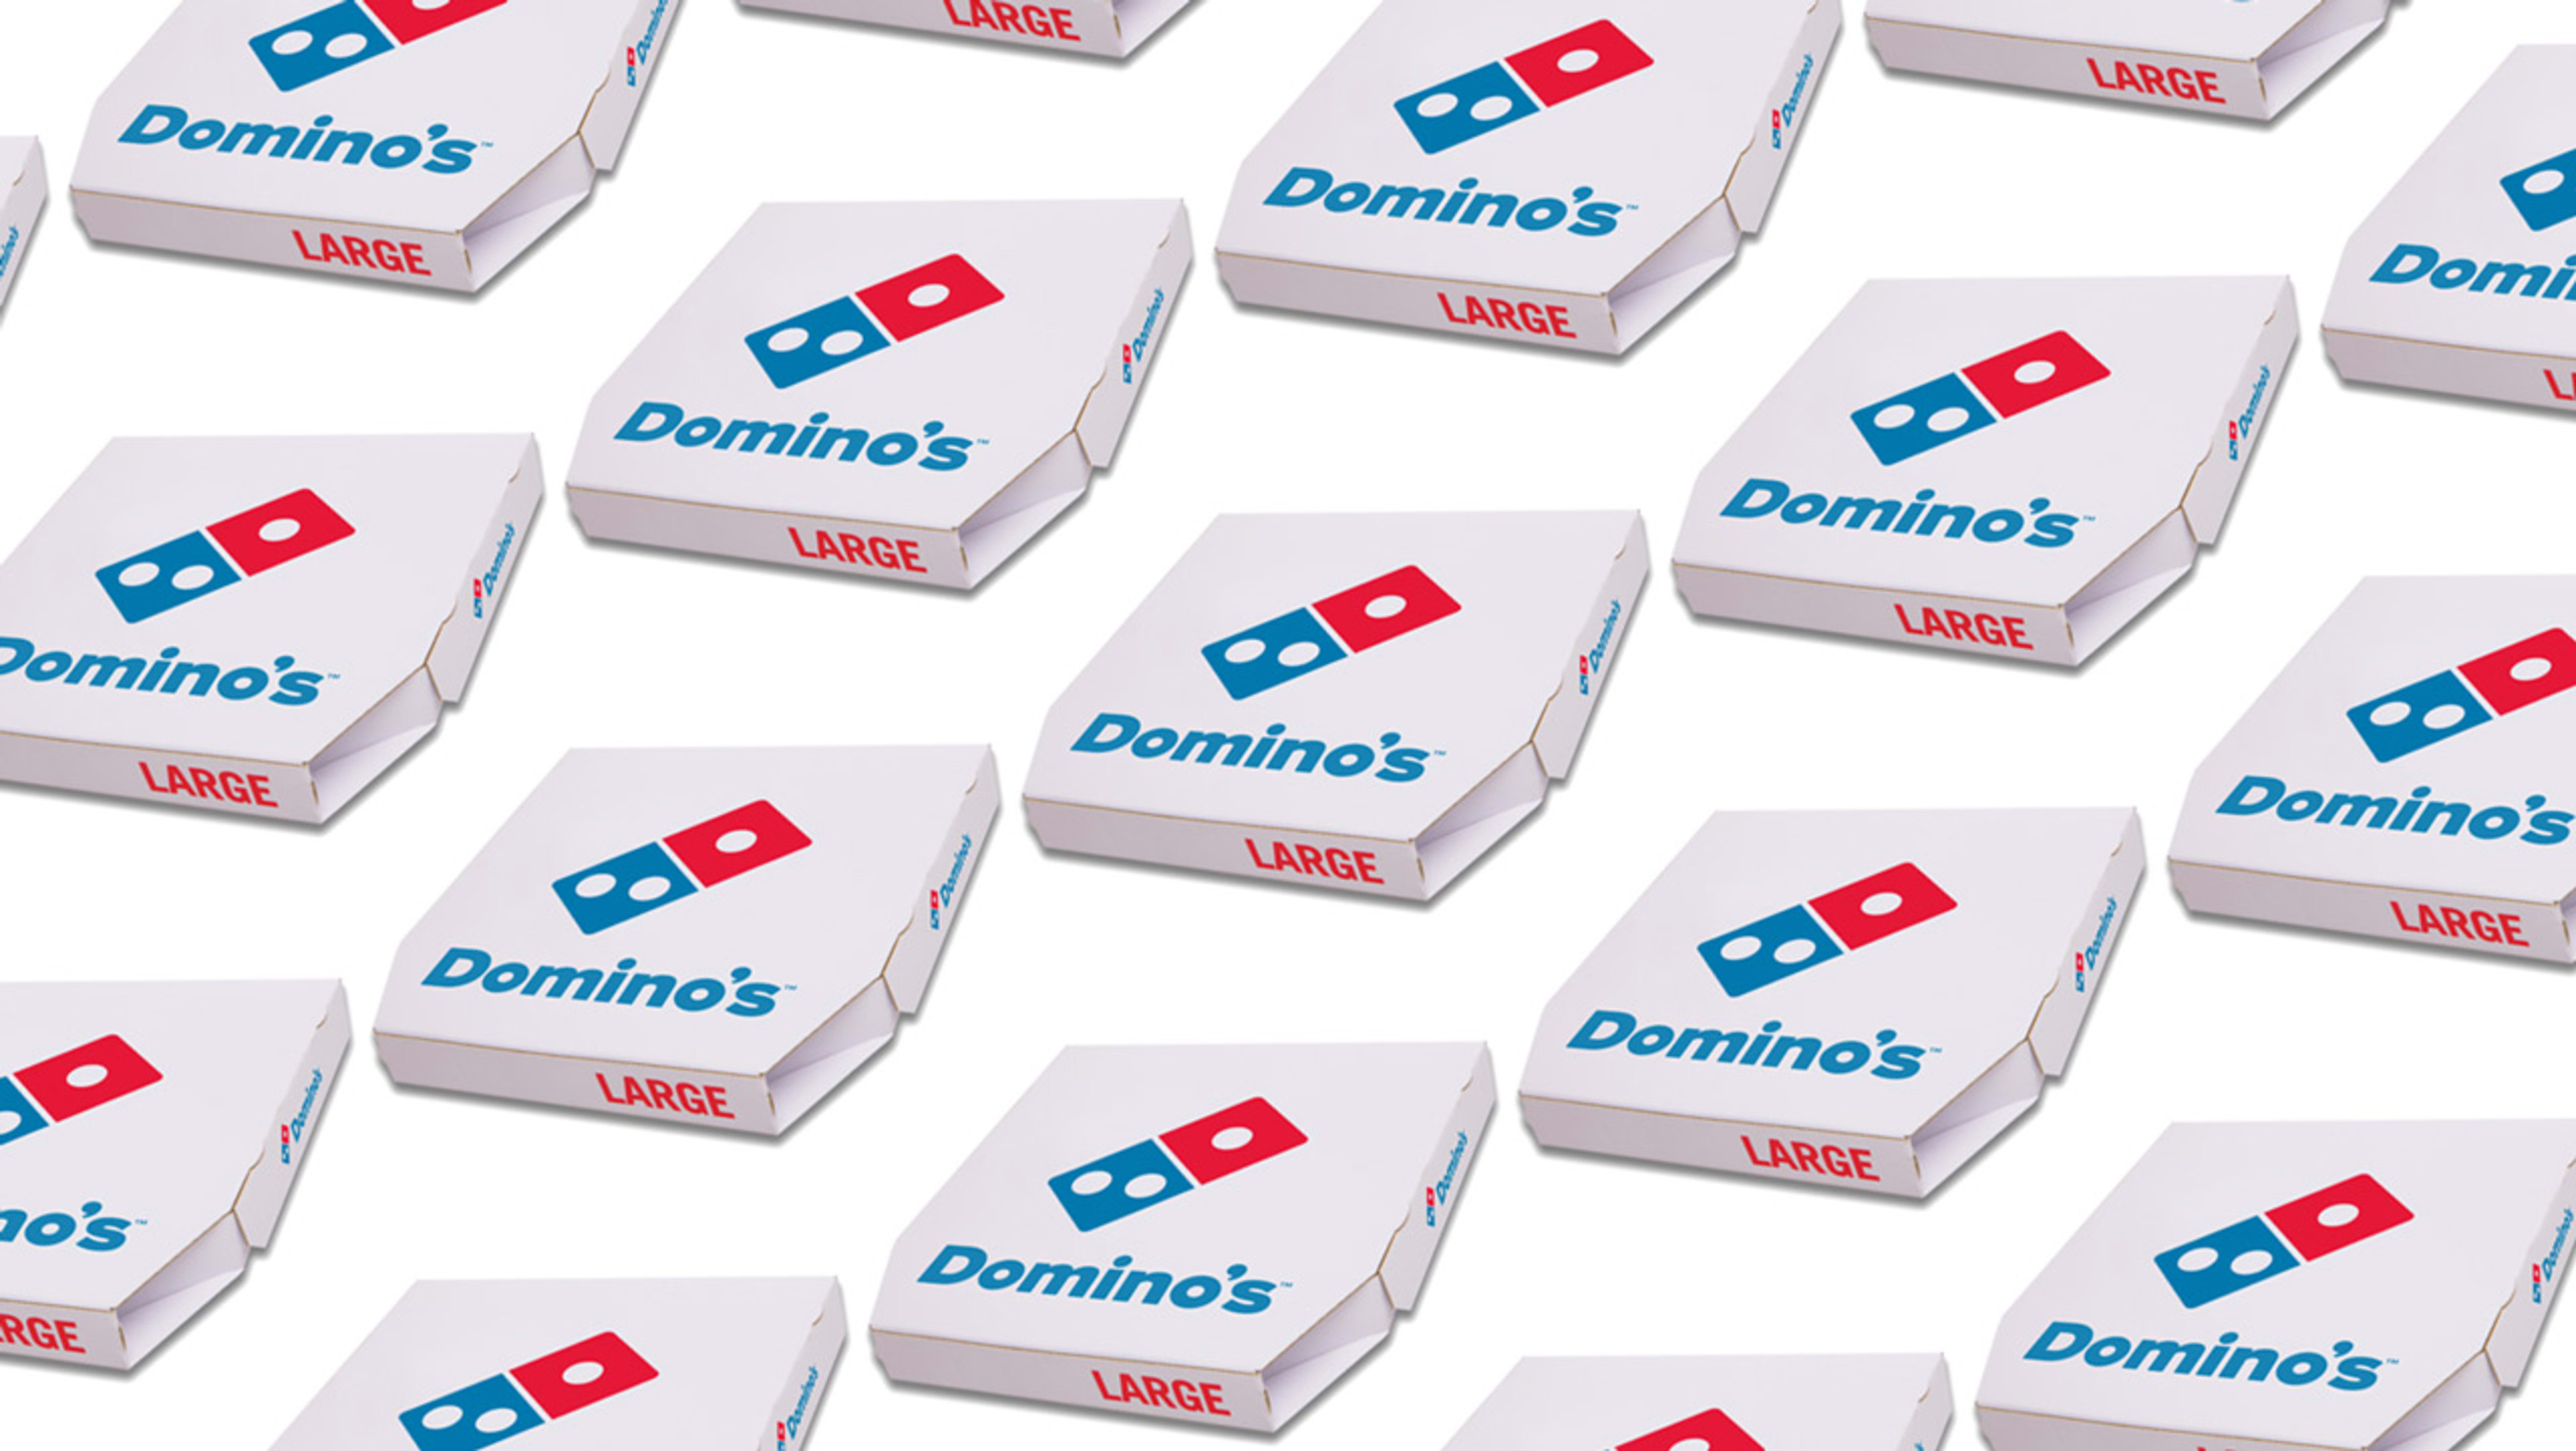 Just what our beaches and parks need—more Domino’s pizza boxes